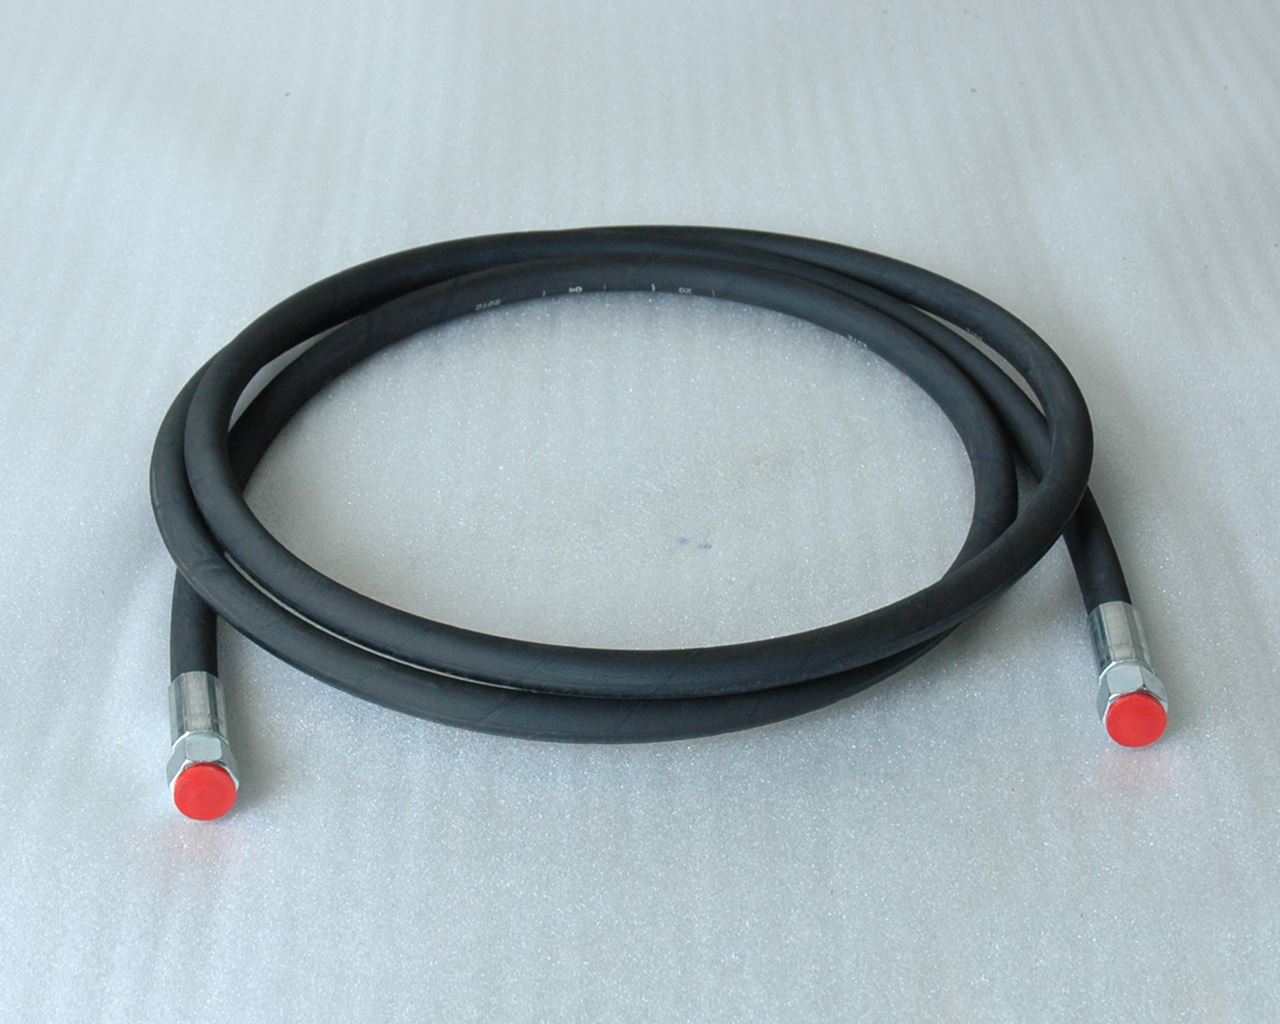 Lift table spare part - Hydraulic hose 3/8